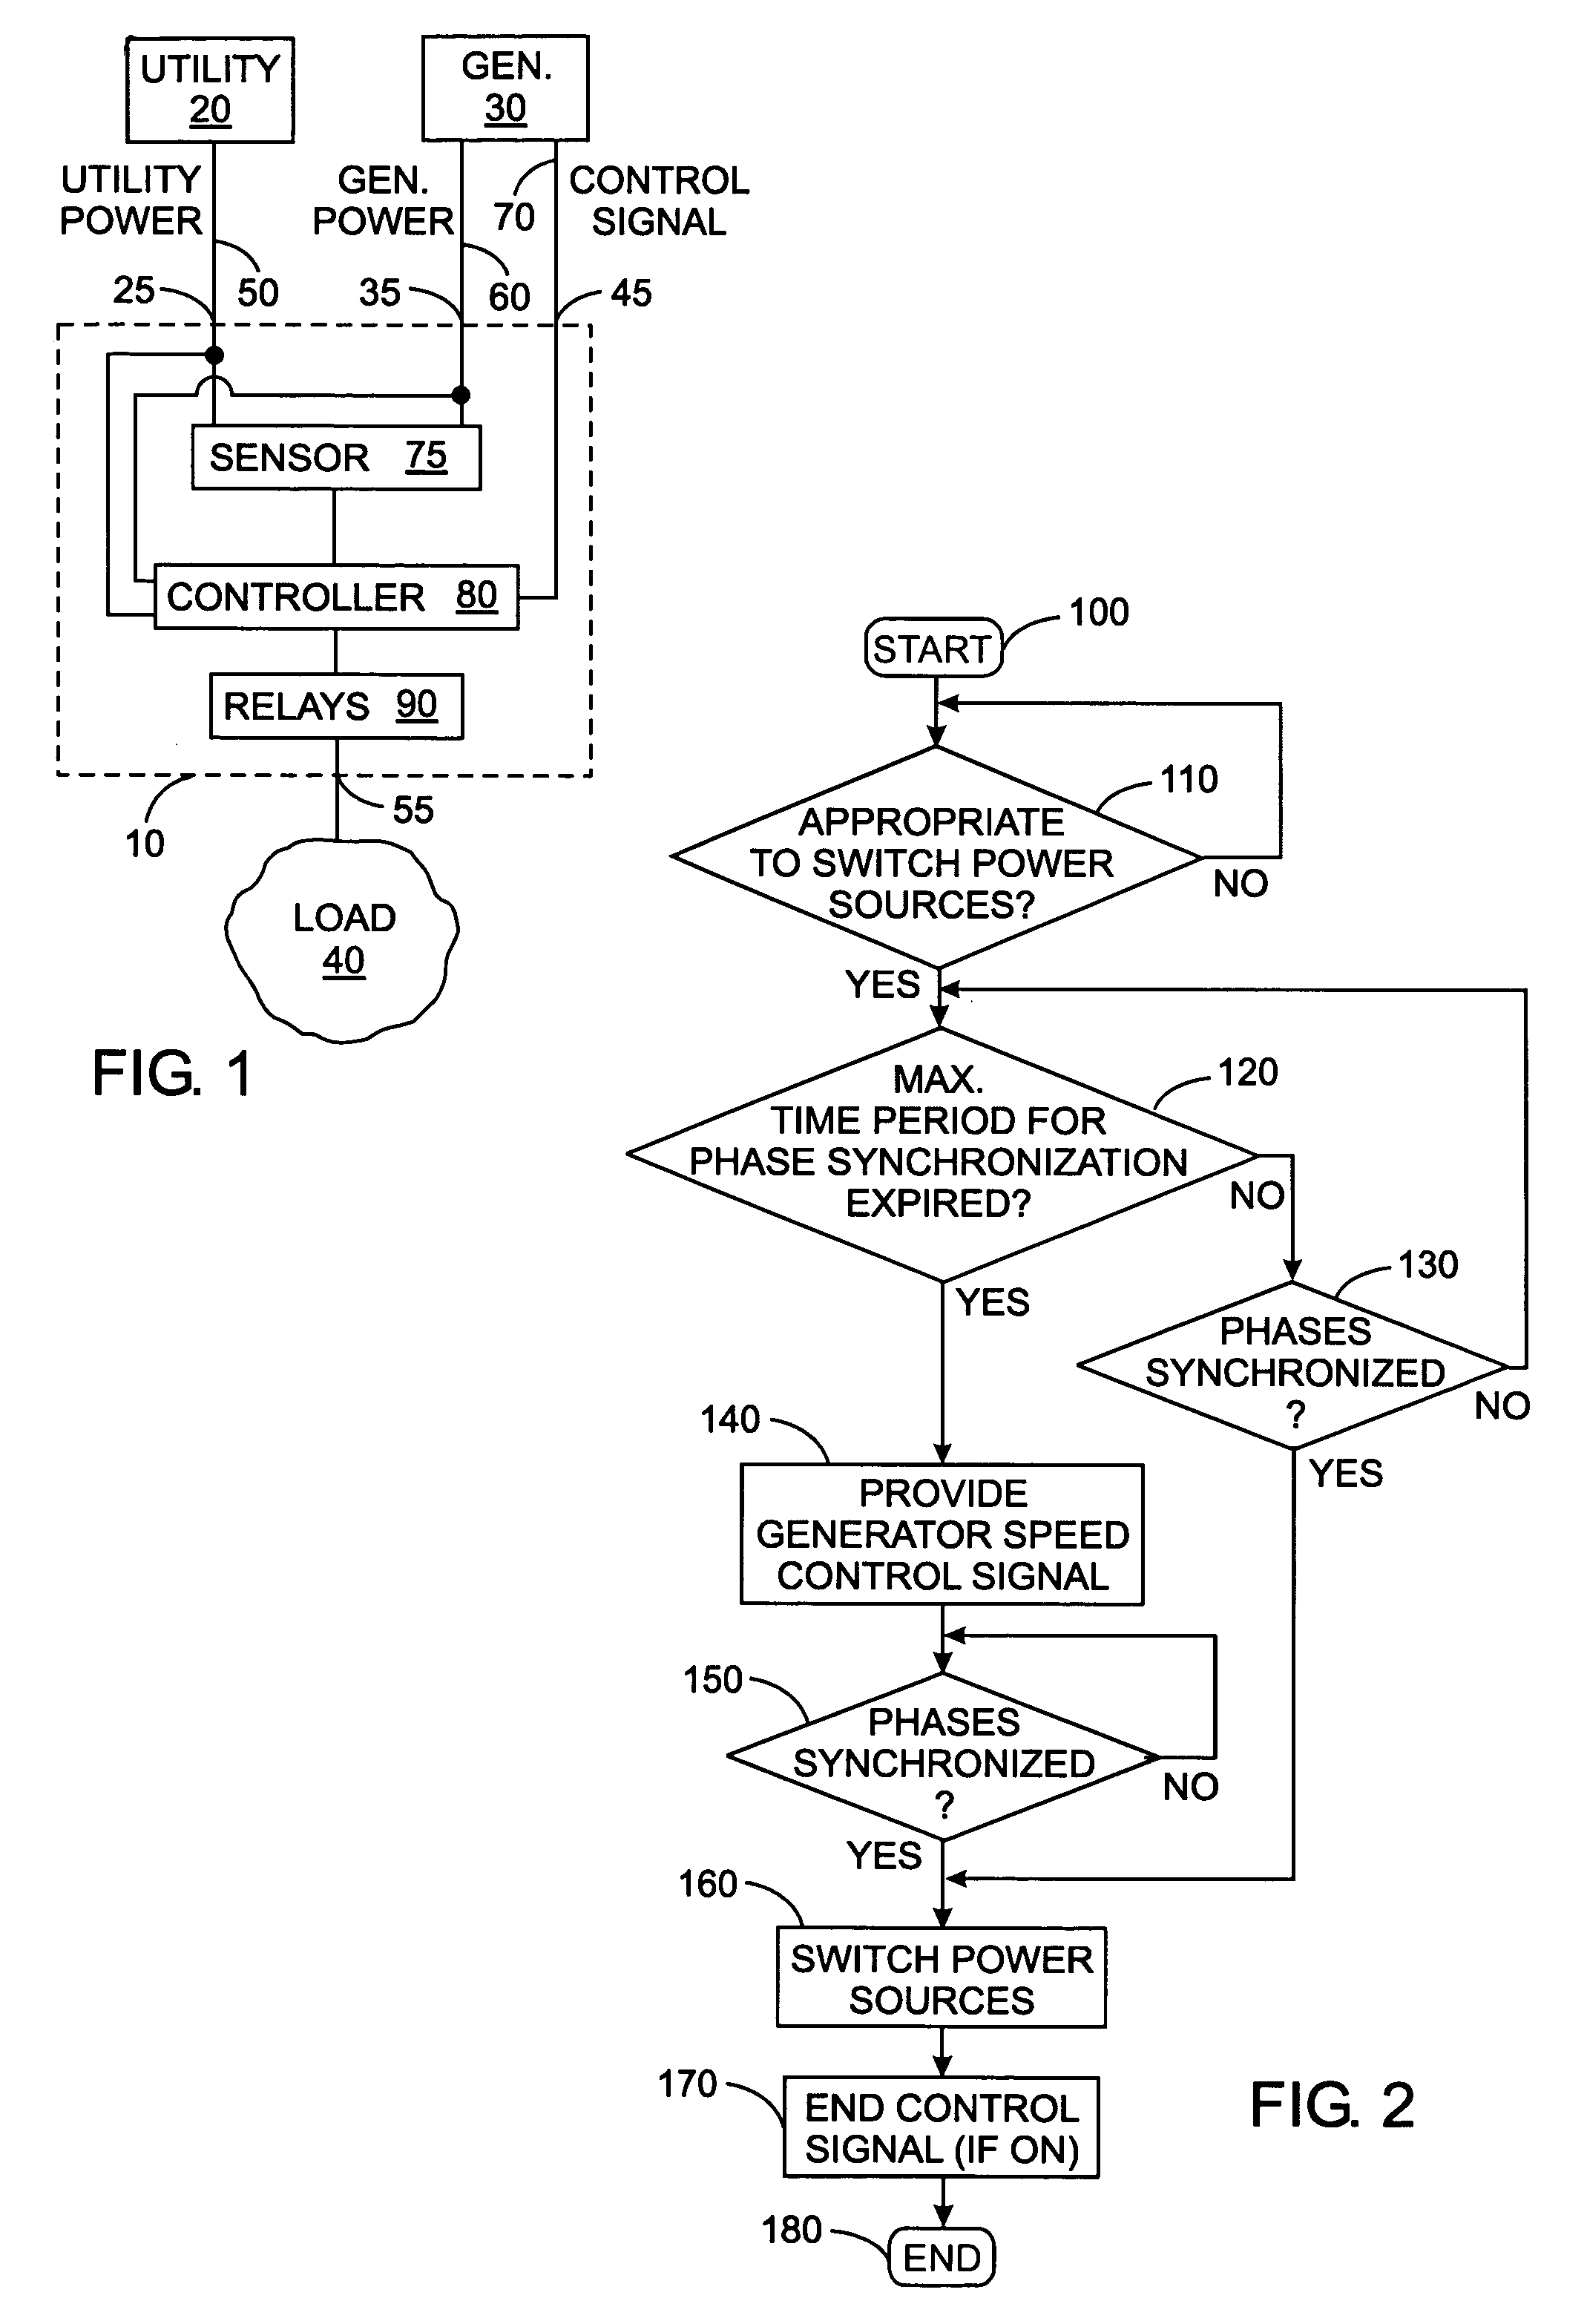 Automatic transfer switch system with synchronization control